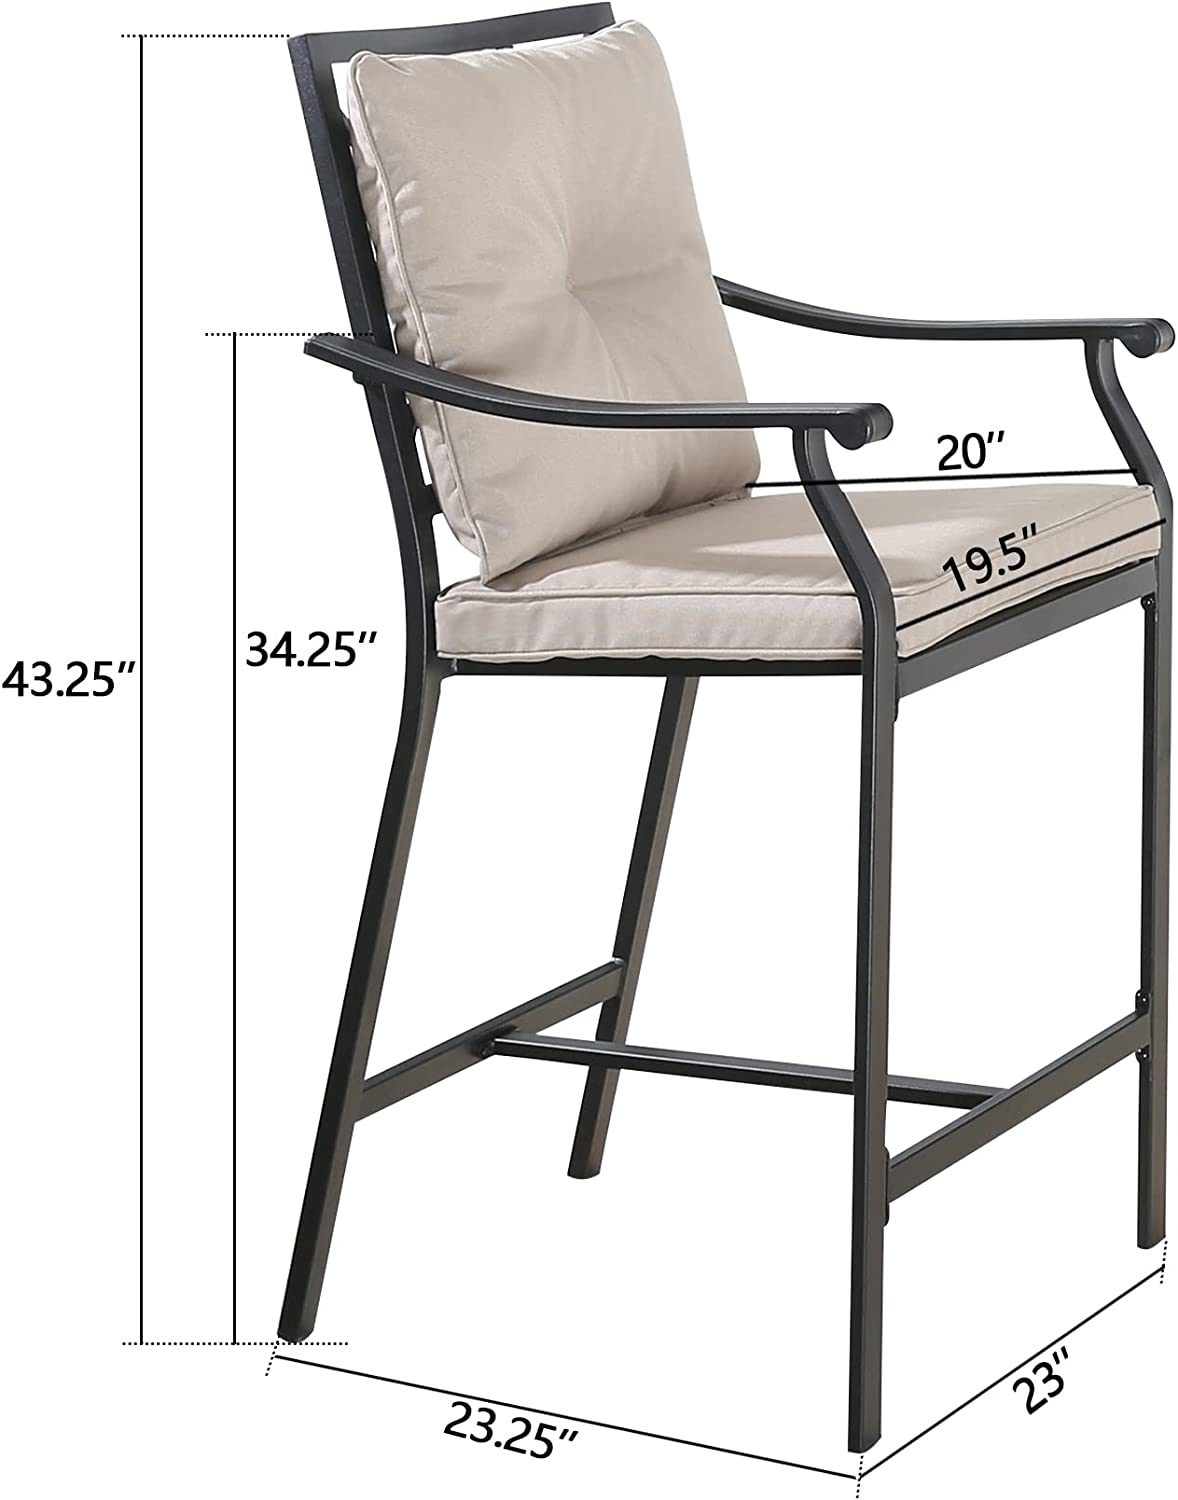 Patio Bar Stools Set of 2 Outdoor Bar Height Chairs Patio Furniture Steel Chairs with Armrest and Cushions for Outdoor Indoor